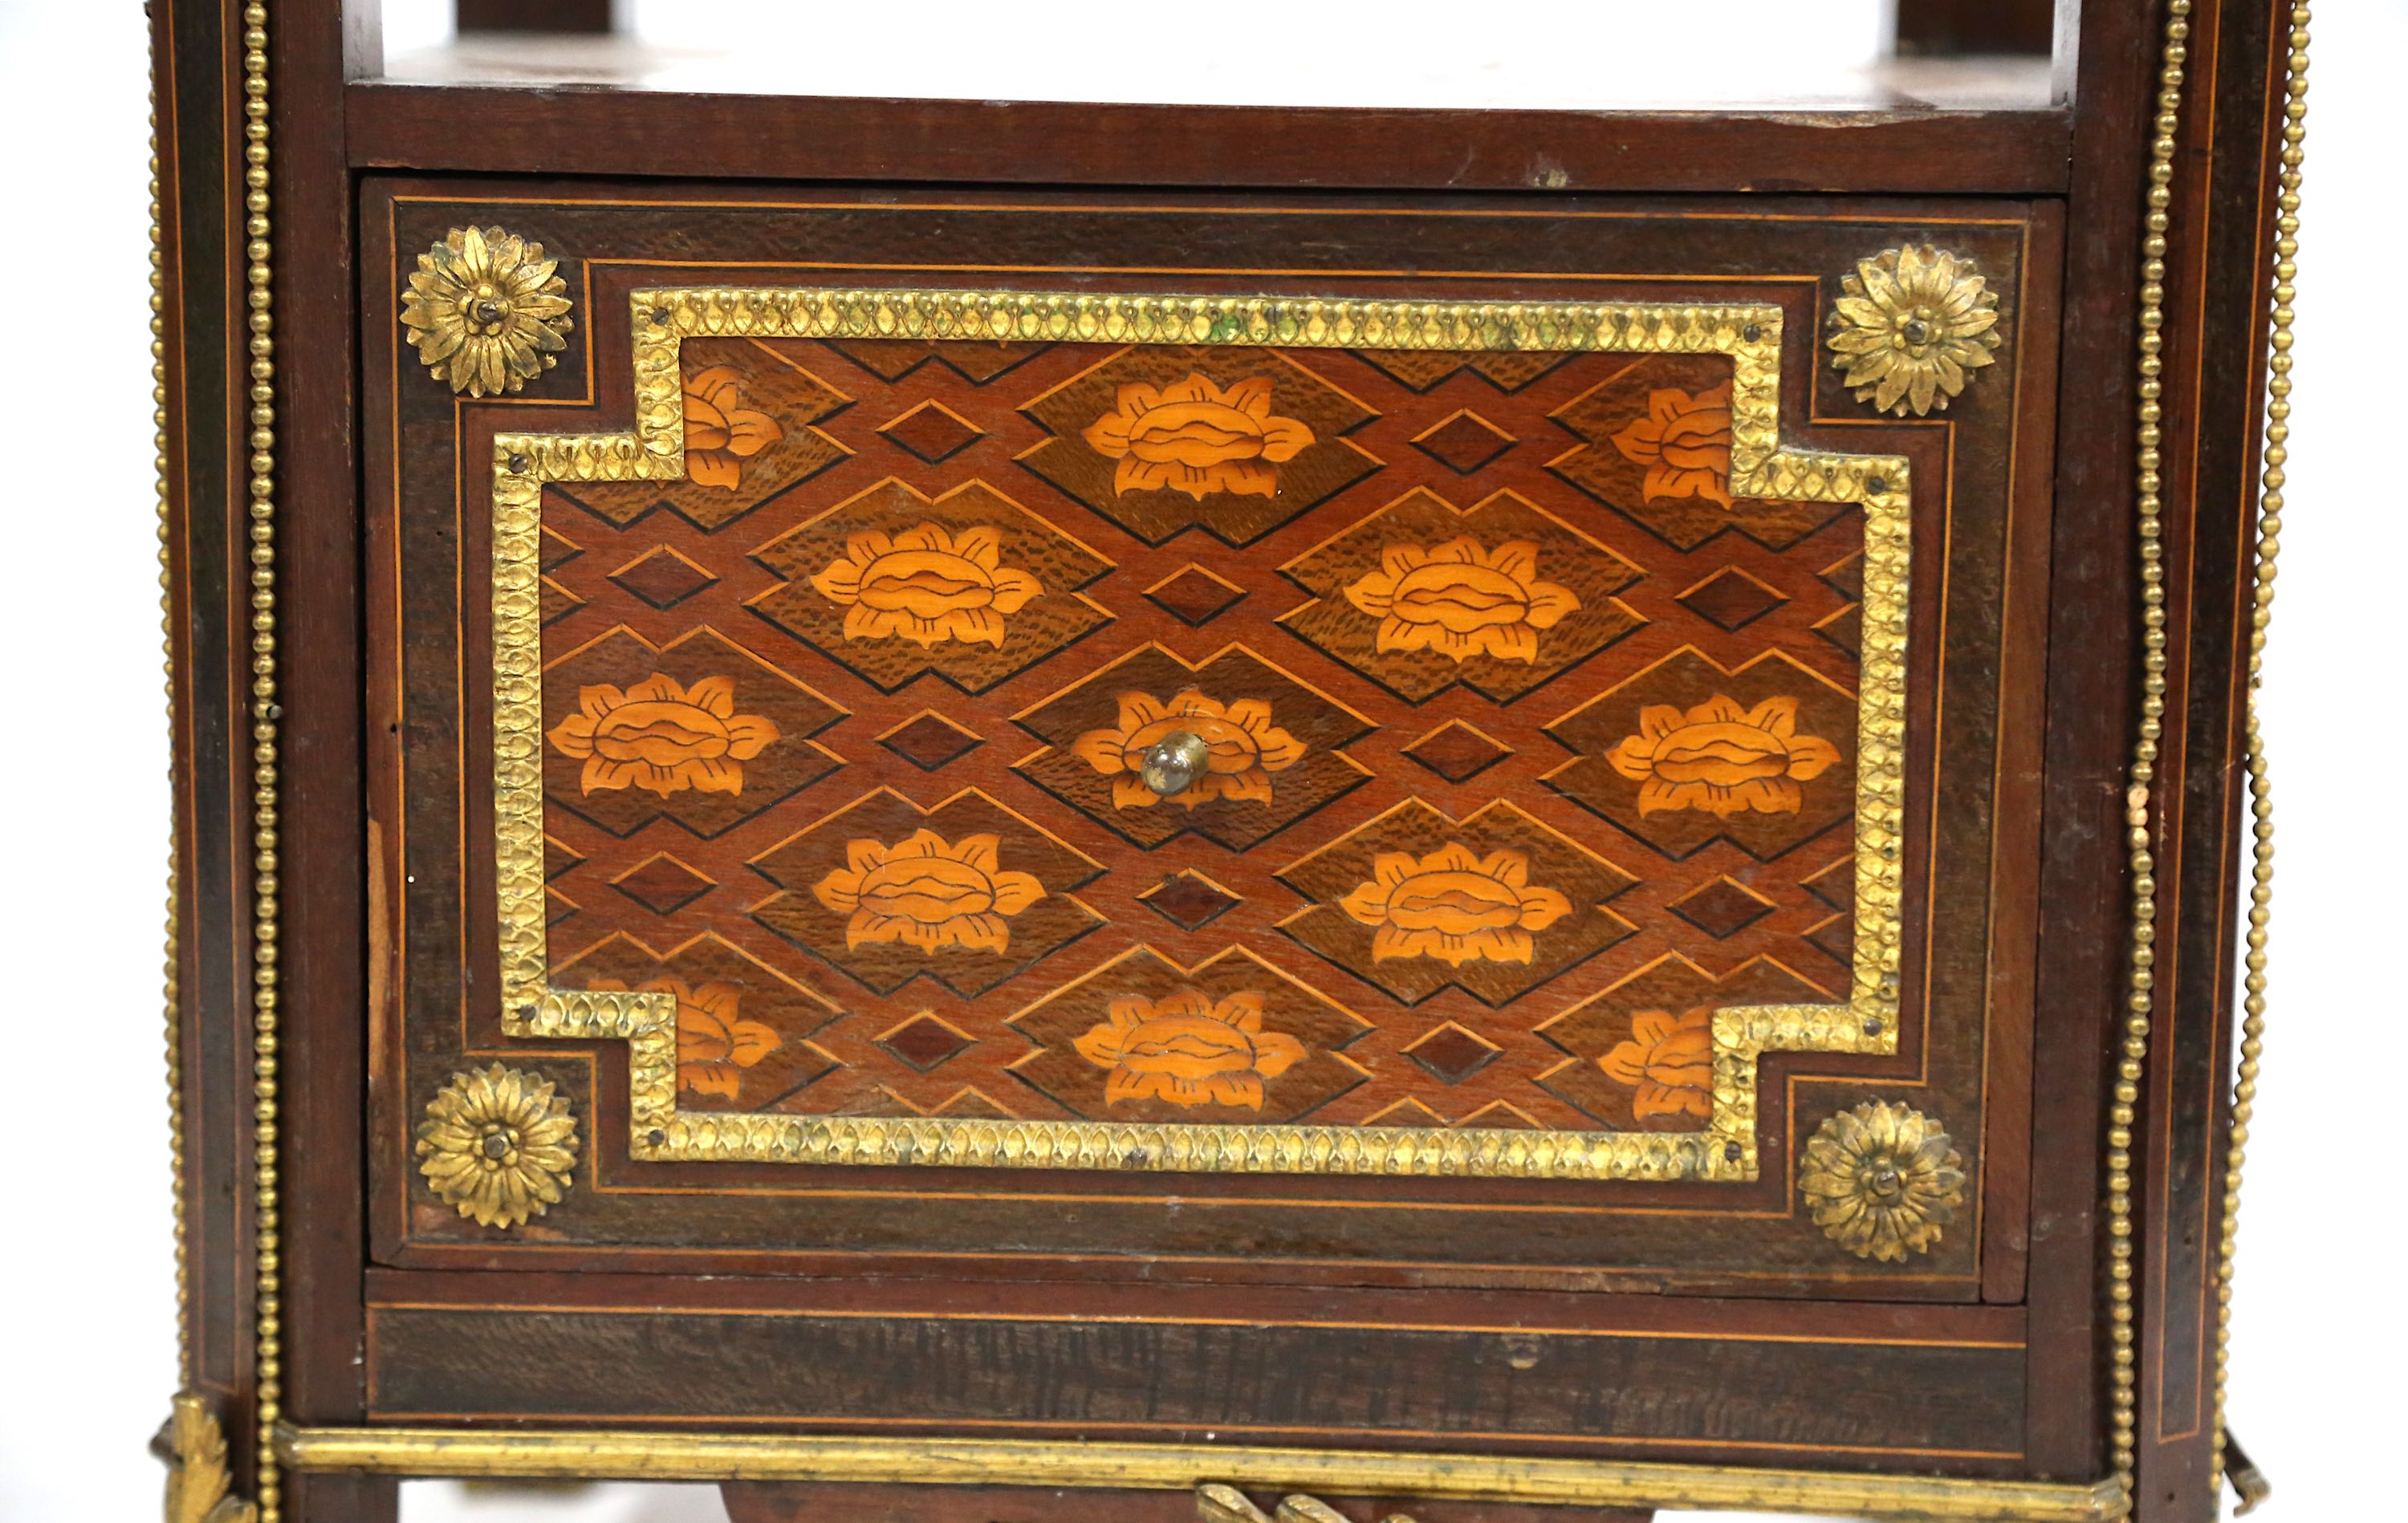 A LATE 19TH CENTURY FRENCH MAHOGANY, CUBE PARQUETR - Image 5 of 7